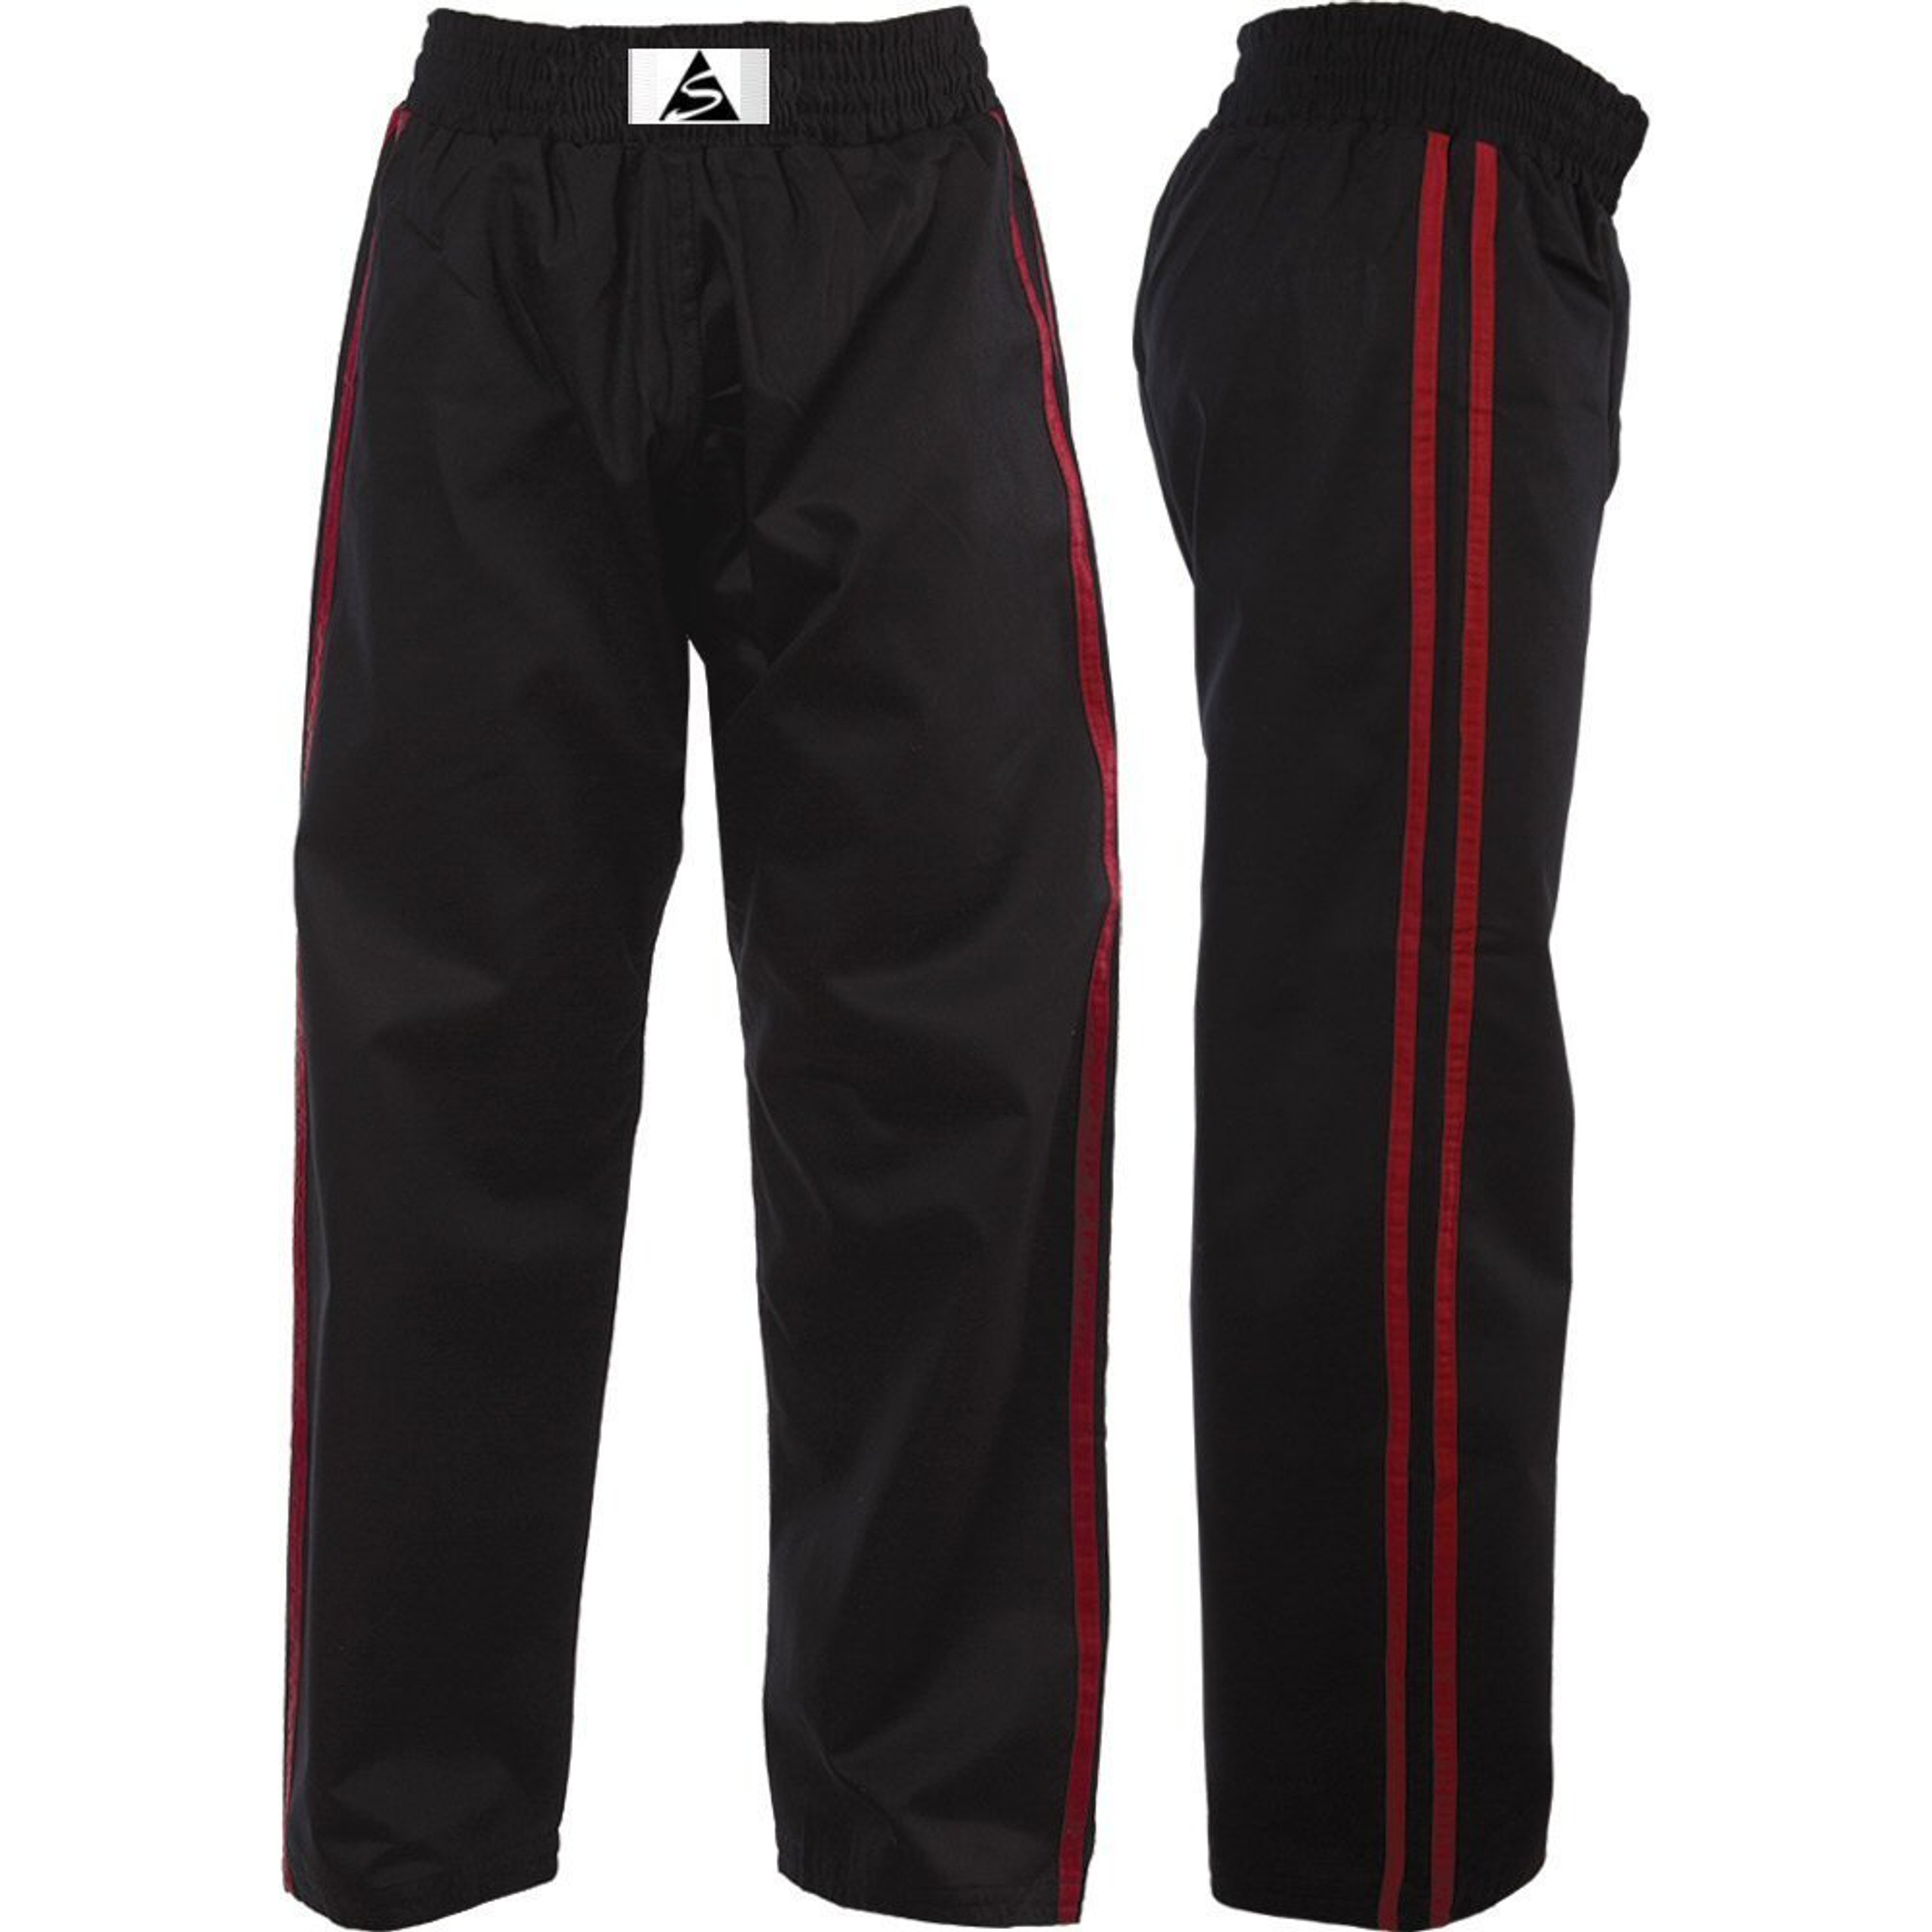 Spirit Black With Red Stripe Kickboxing Trousers - Martial Art Shop